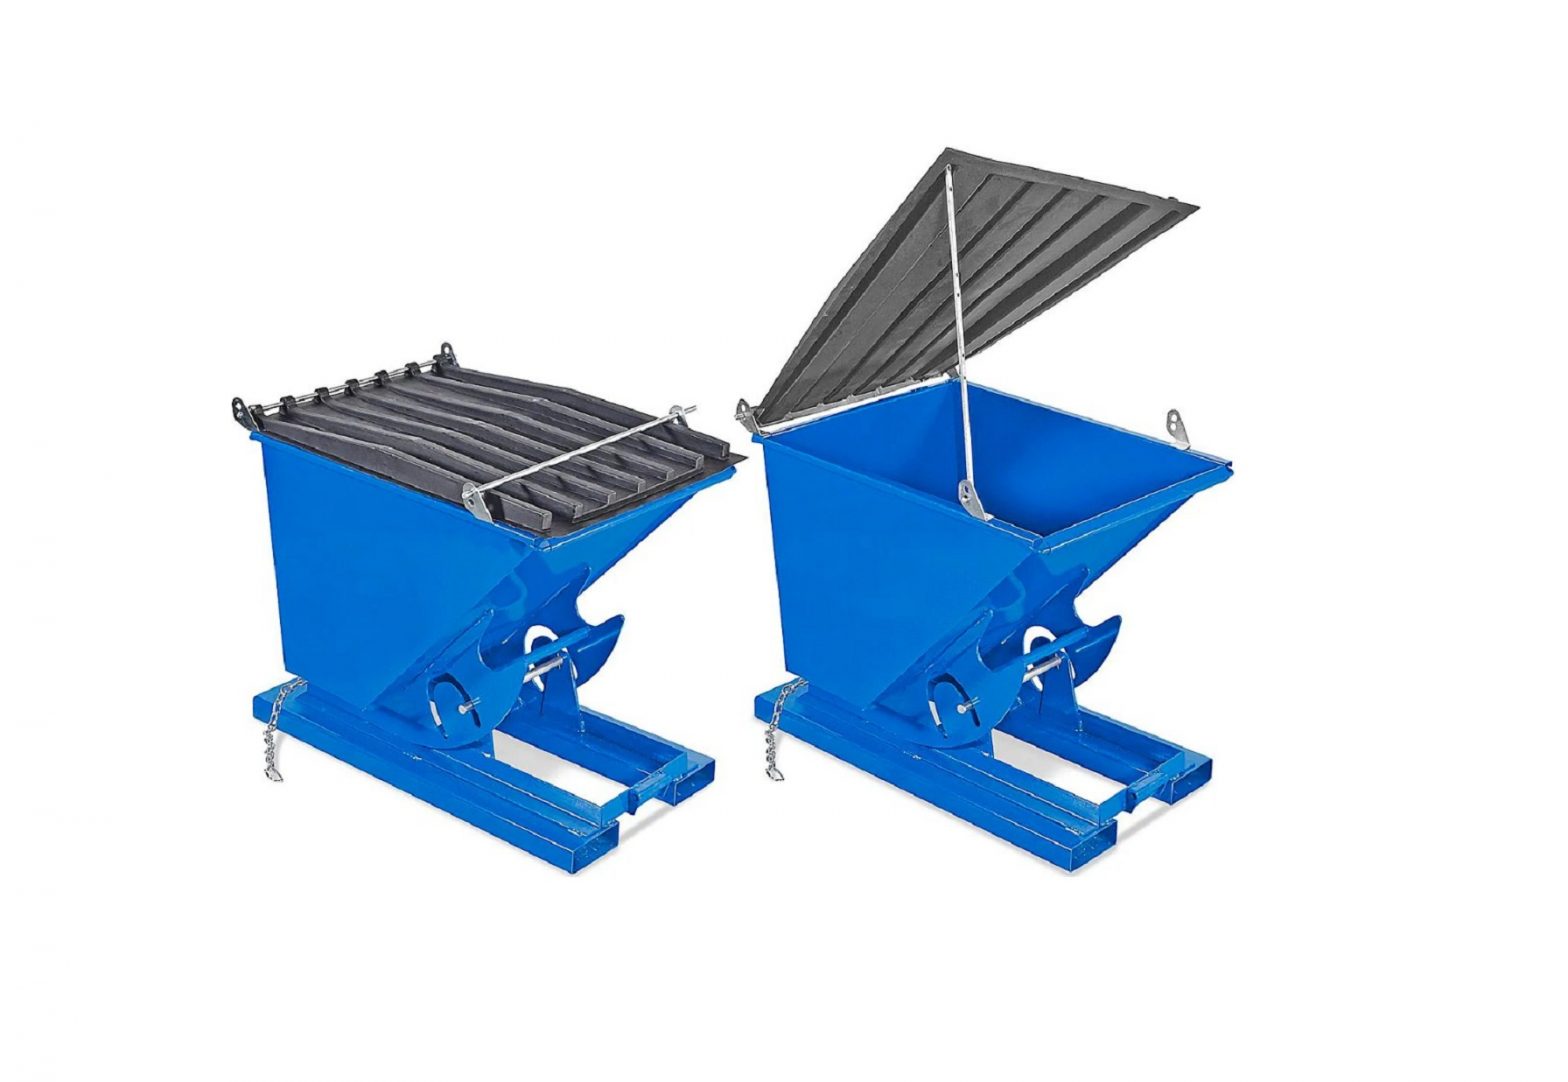 ULINE Lids For Dumping Hoppers Installation Guide